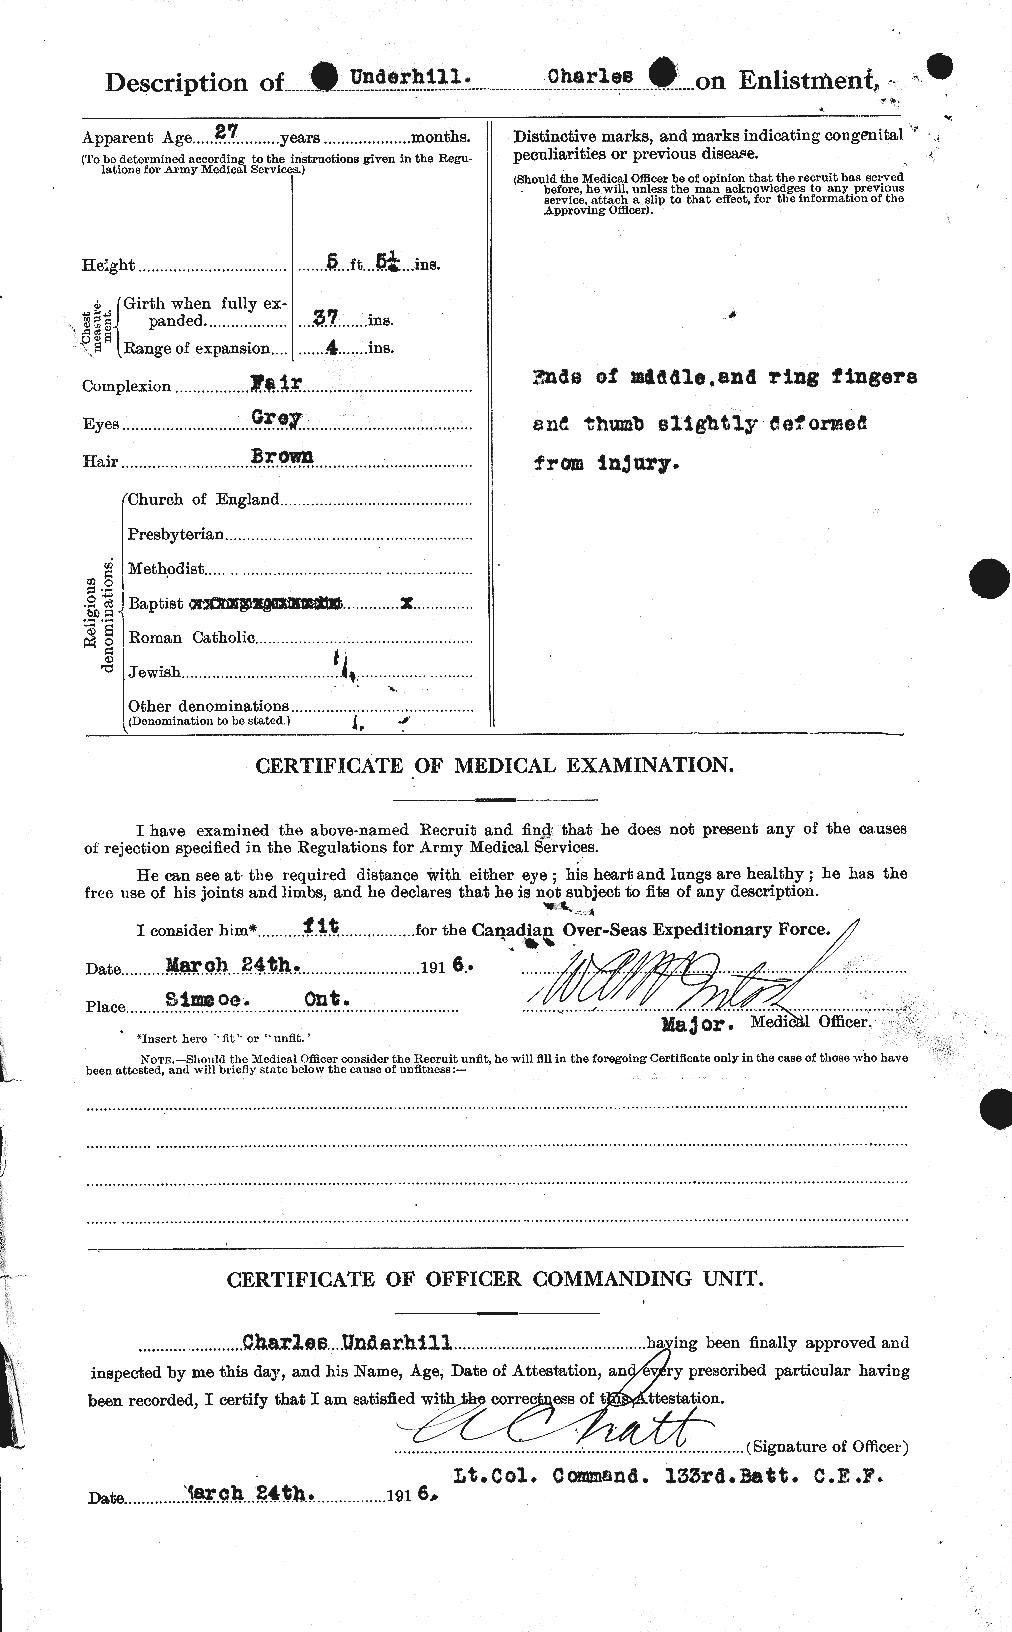 Personnel Records of the First World War - CEF 647078b